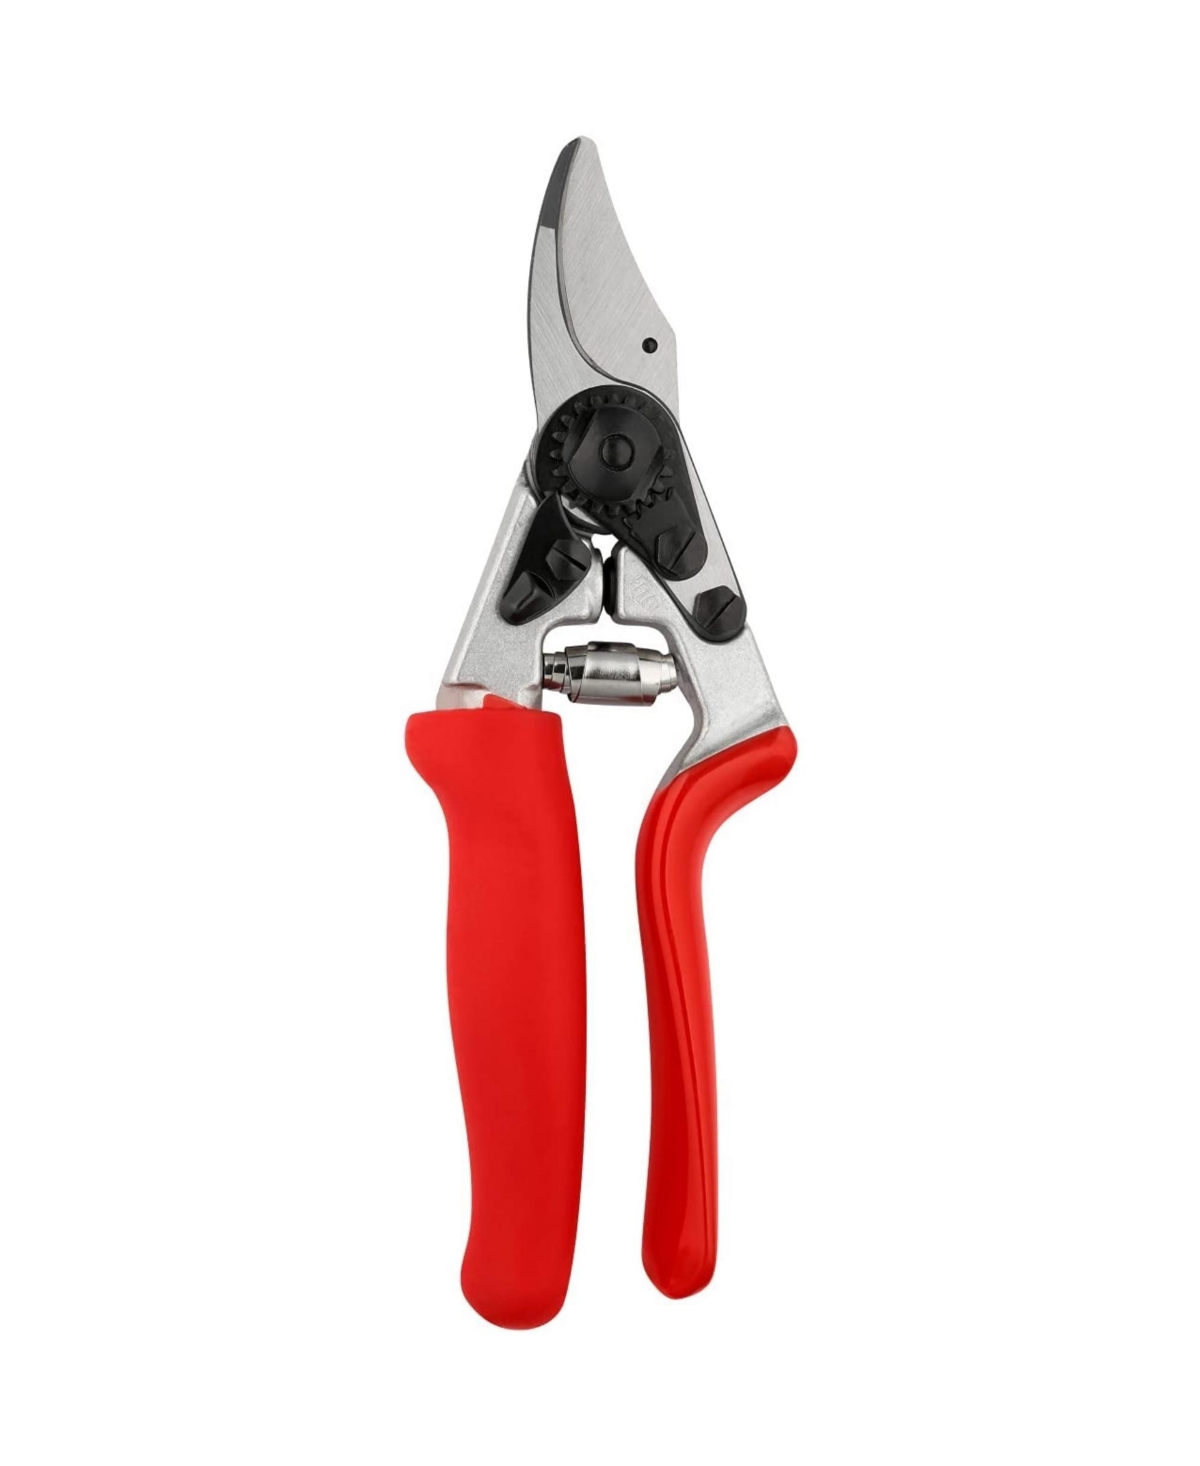 F12 One-handed Ergonomic Compact Pruning Shears, 7.8 Inches - Multi